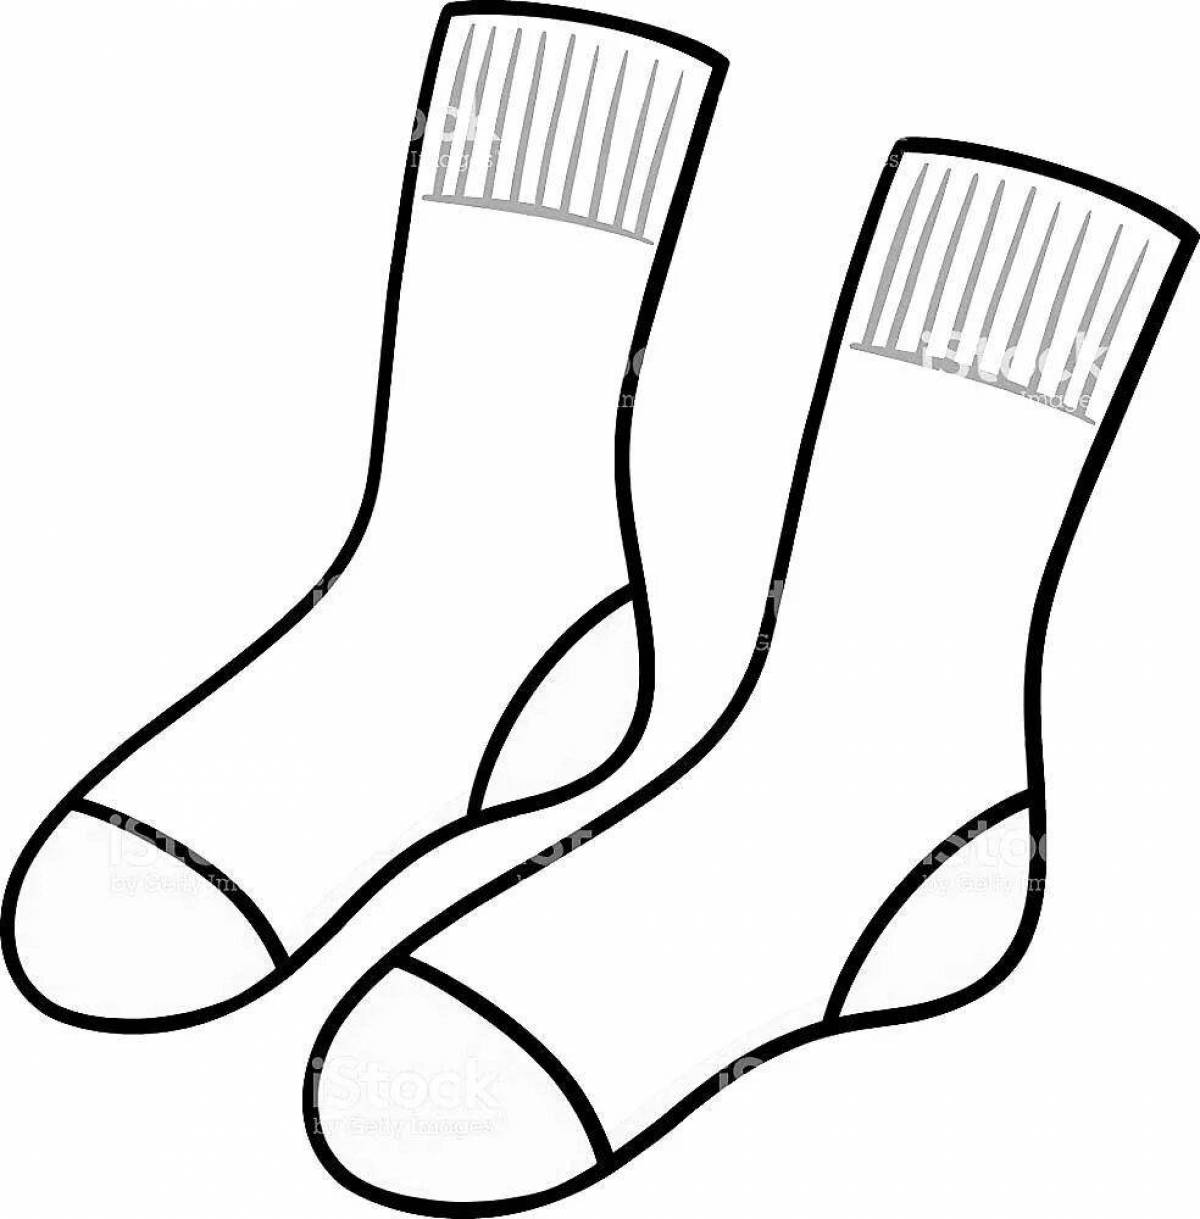 Attractive socks coloring for kids